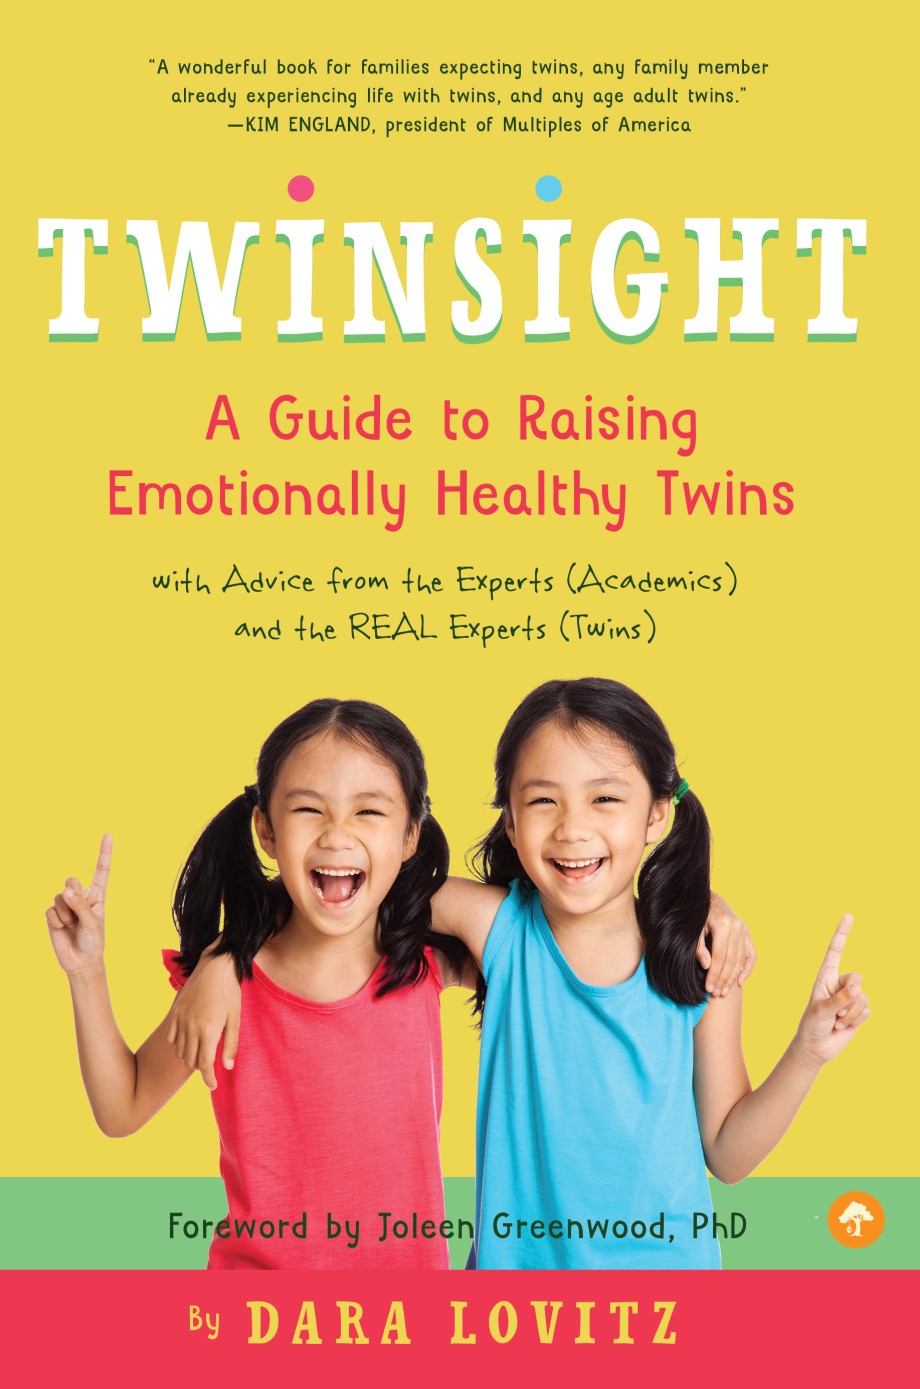 Twinsight A Guide to Raising Emotionally Healthy Twins with Advice from the Experts (Academics) and the REAL Experts (Twins)